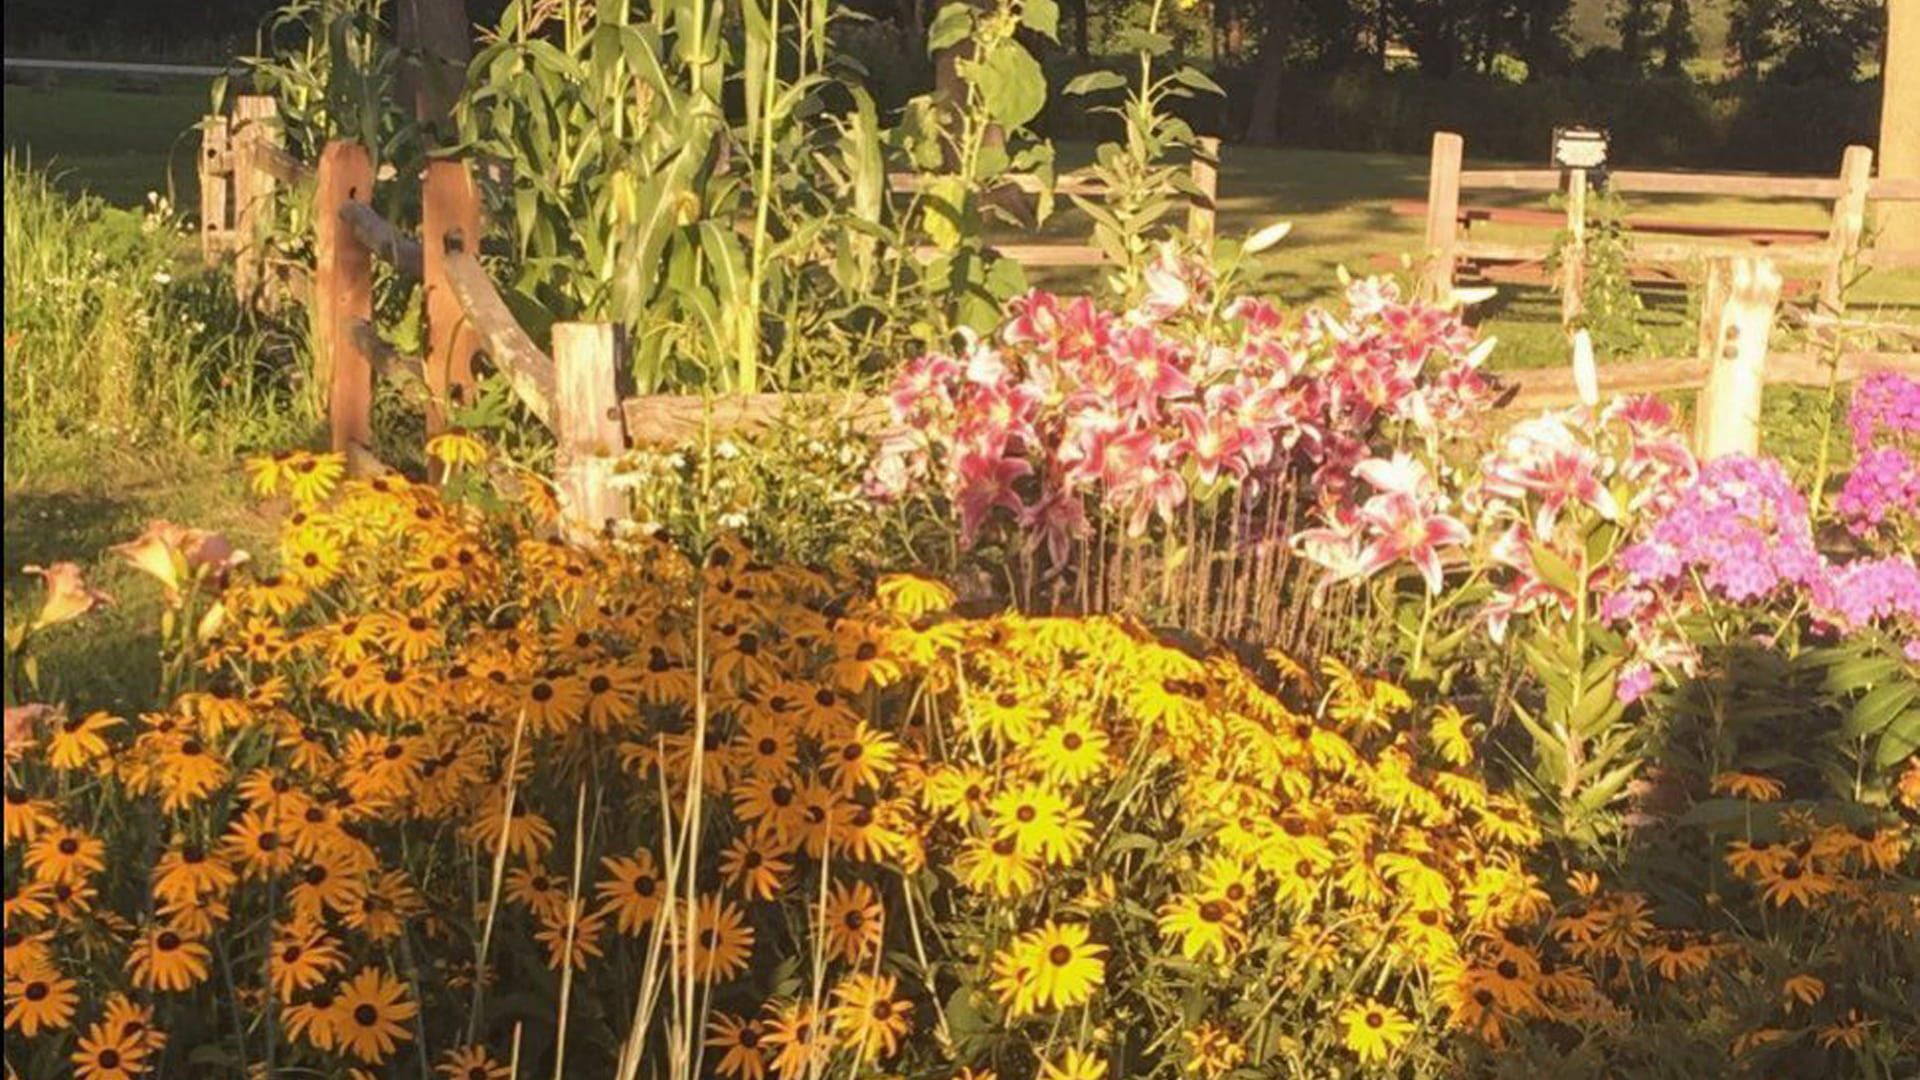 A garden with flowers and corn growing in it. - Cottagecore